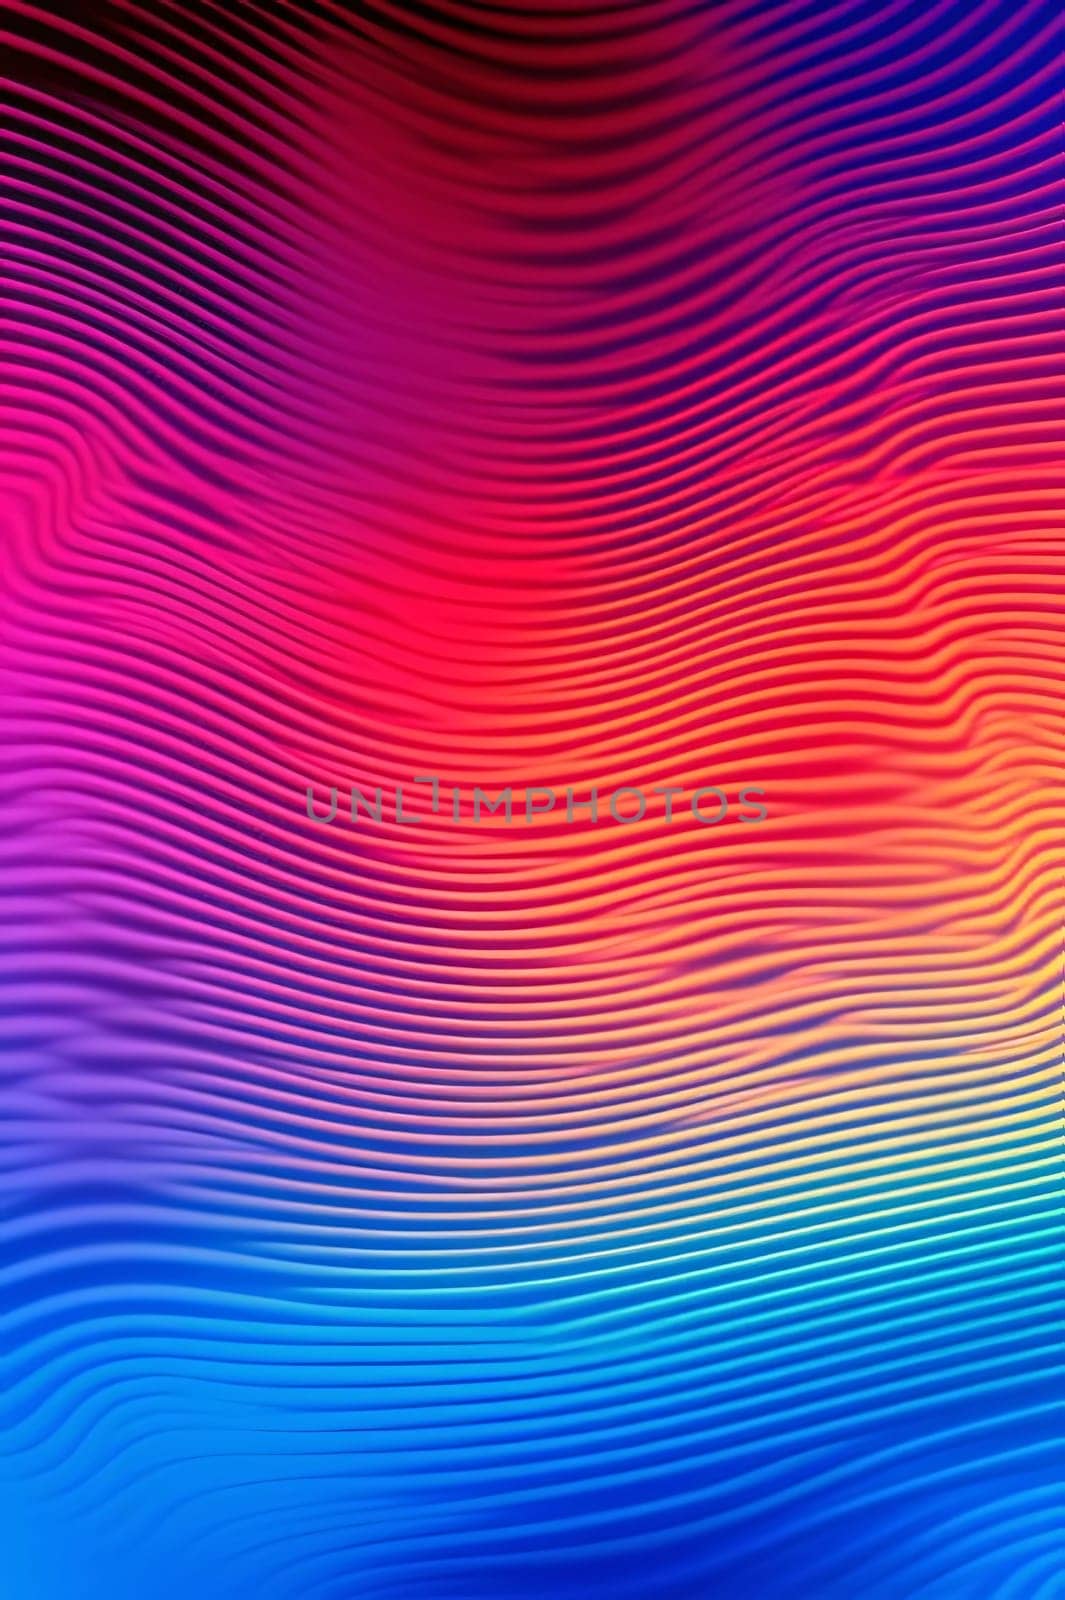 Abstract background design: Abstract background with wavy lines. Vector illustration for your design.